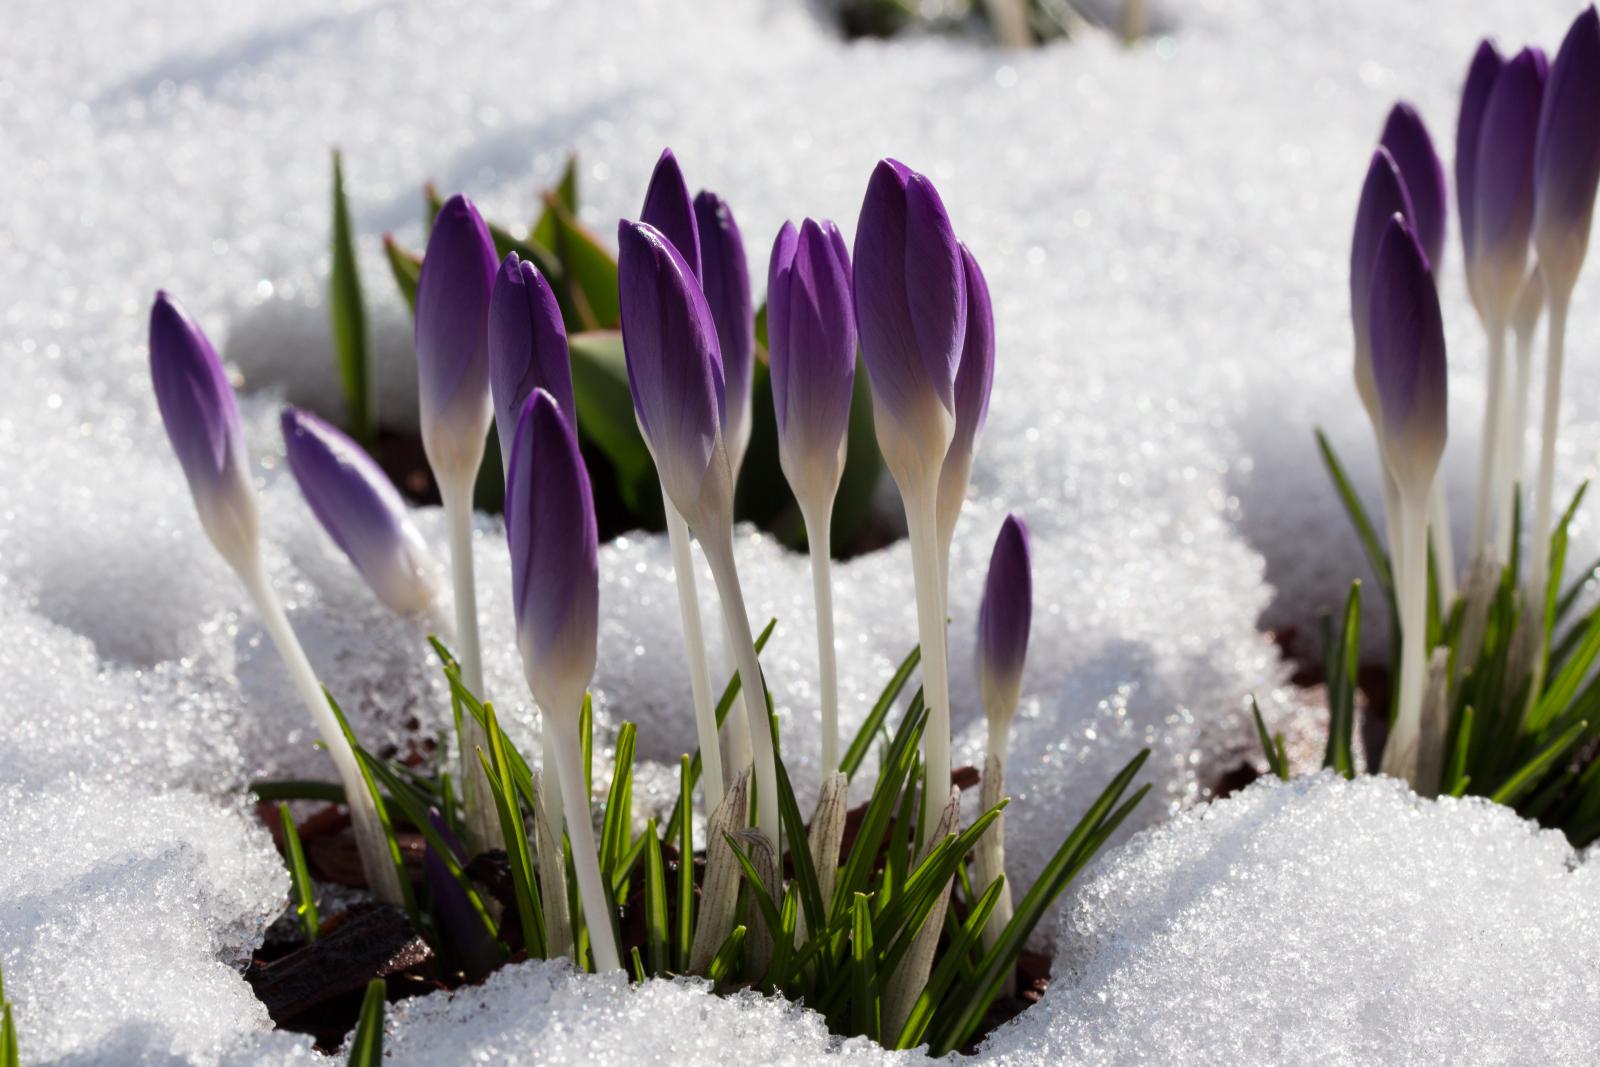 Preparing for Spring: Your Monthly Gardening Guide for February